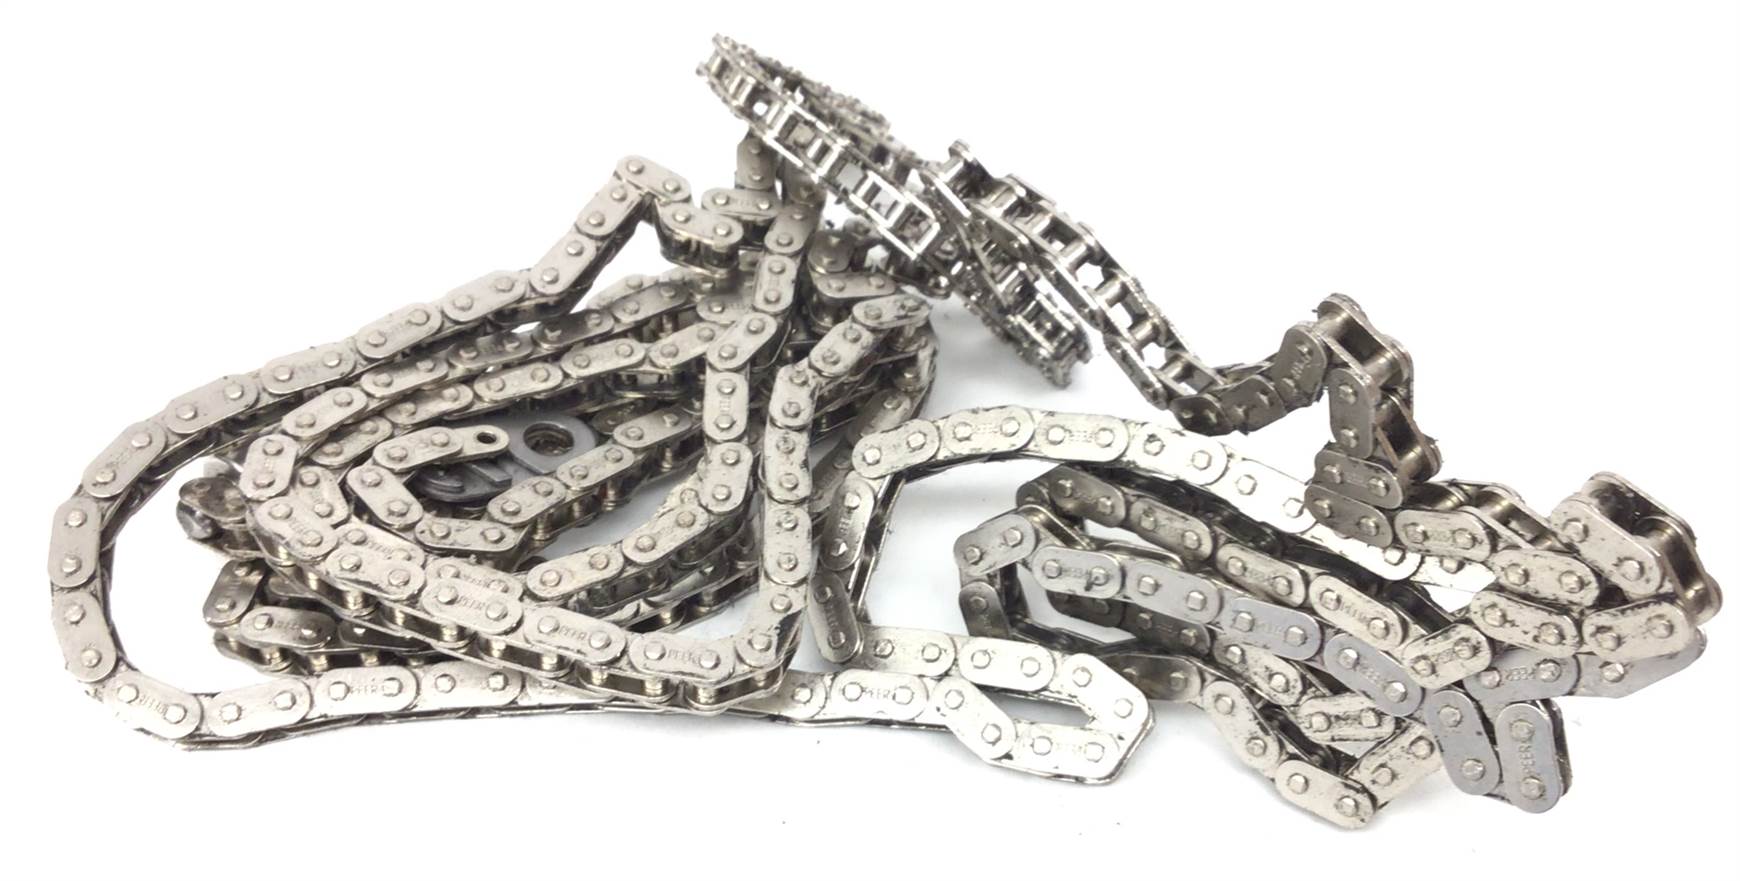 Chain with Connector and Swivel (Used)